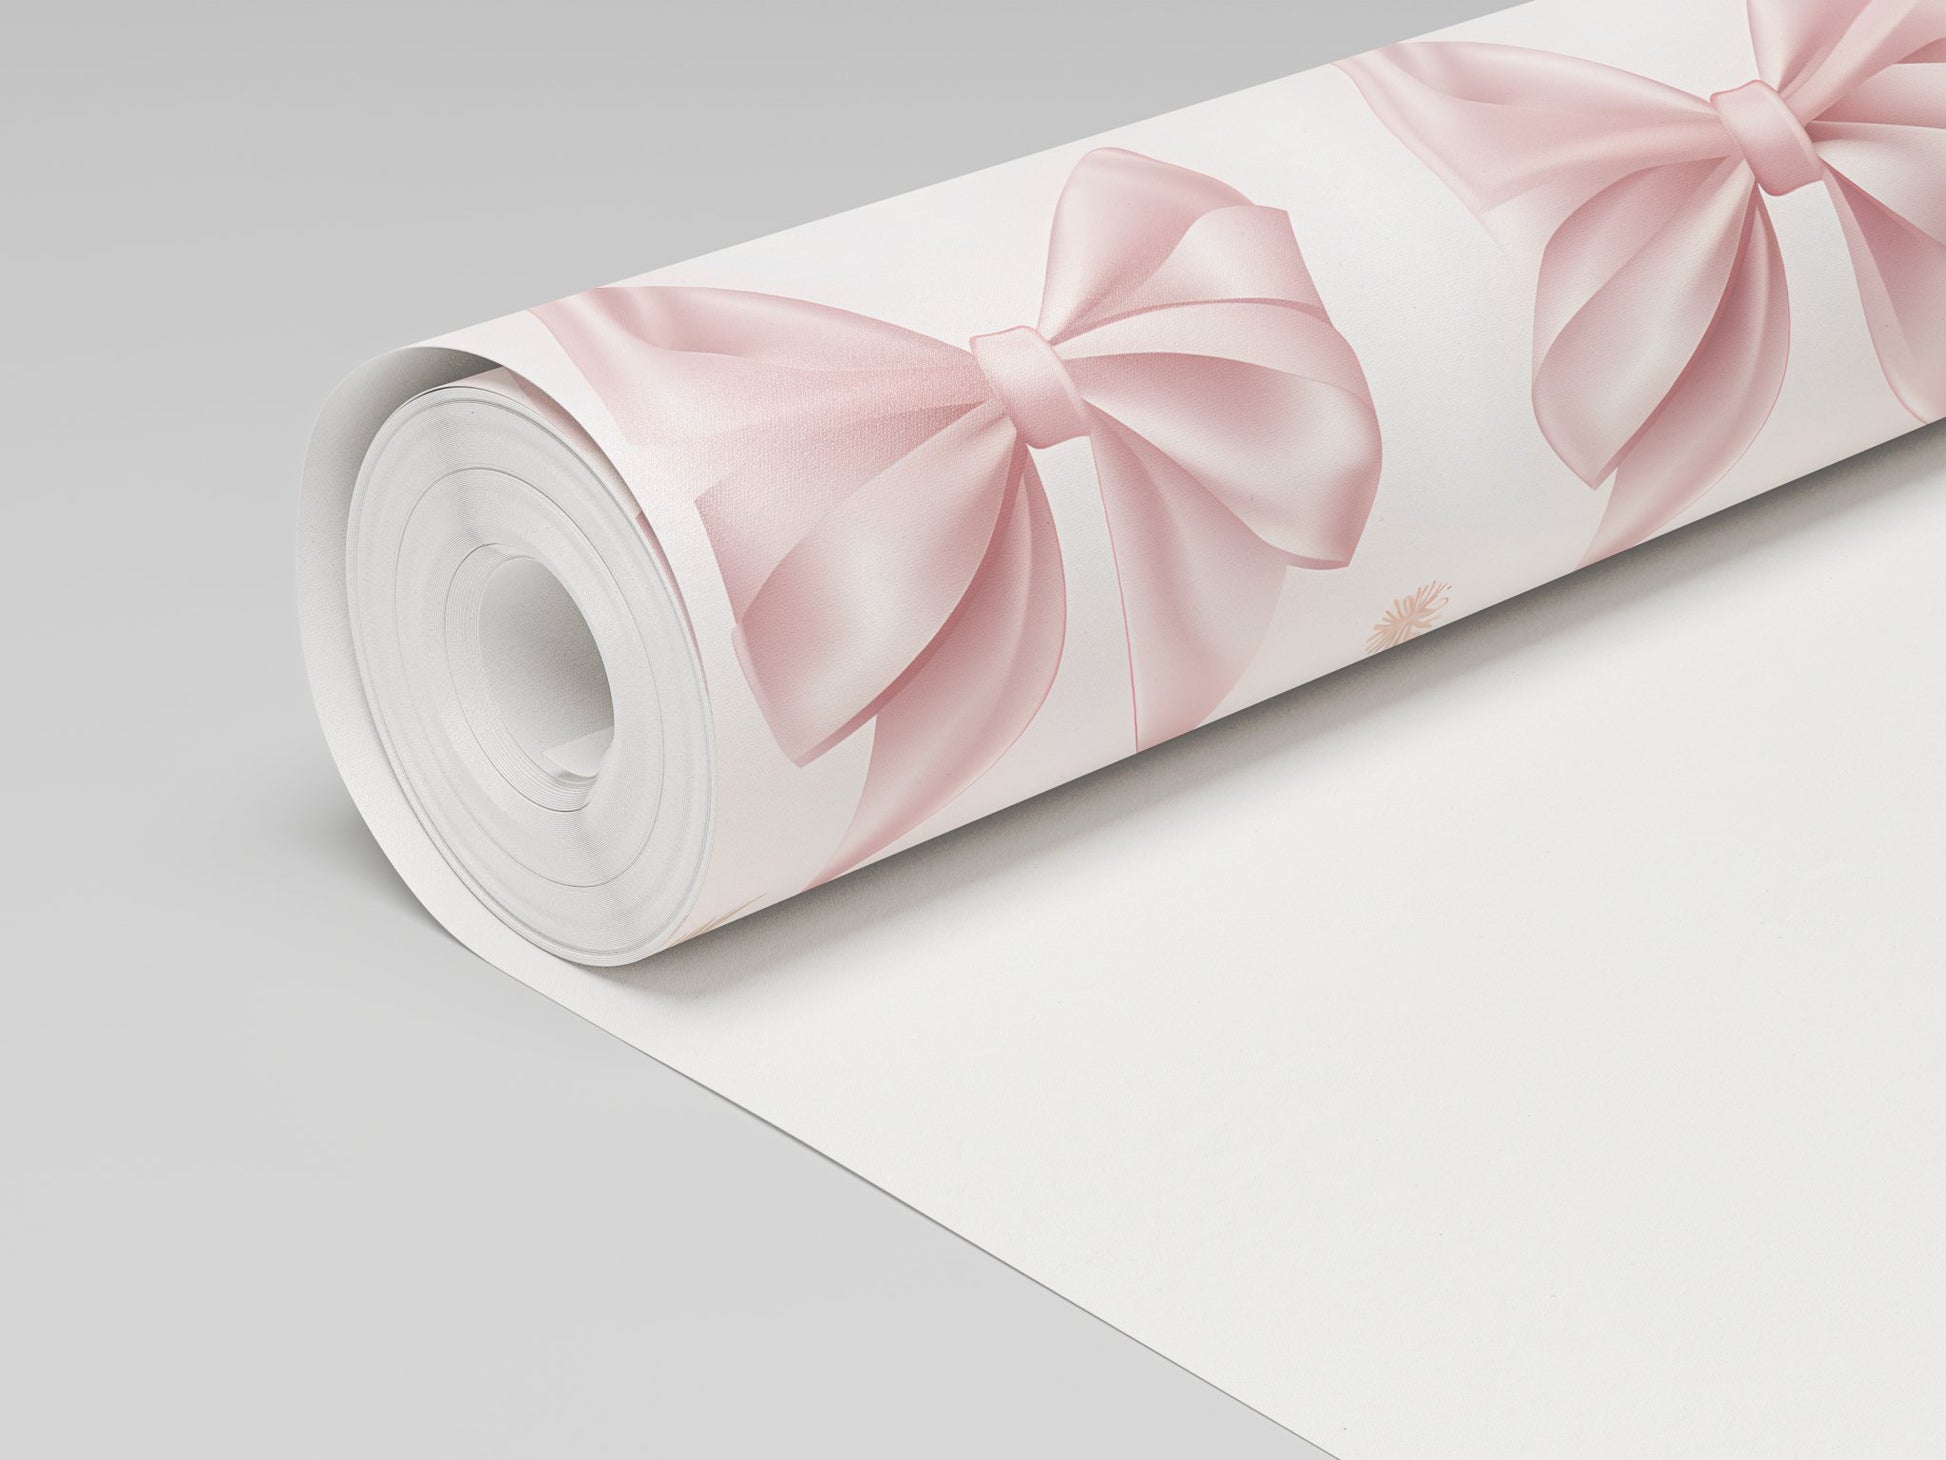 Gracie Dainty Bow Wallpaper - Painted Paper